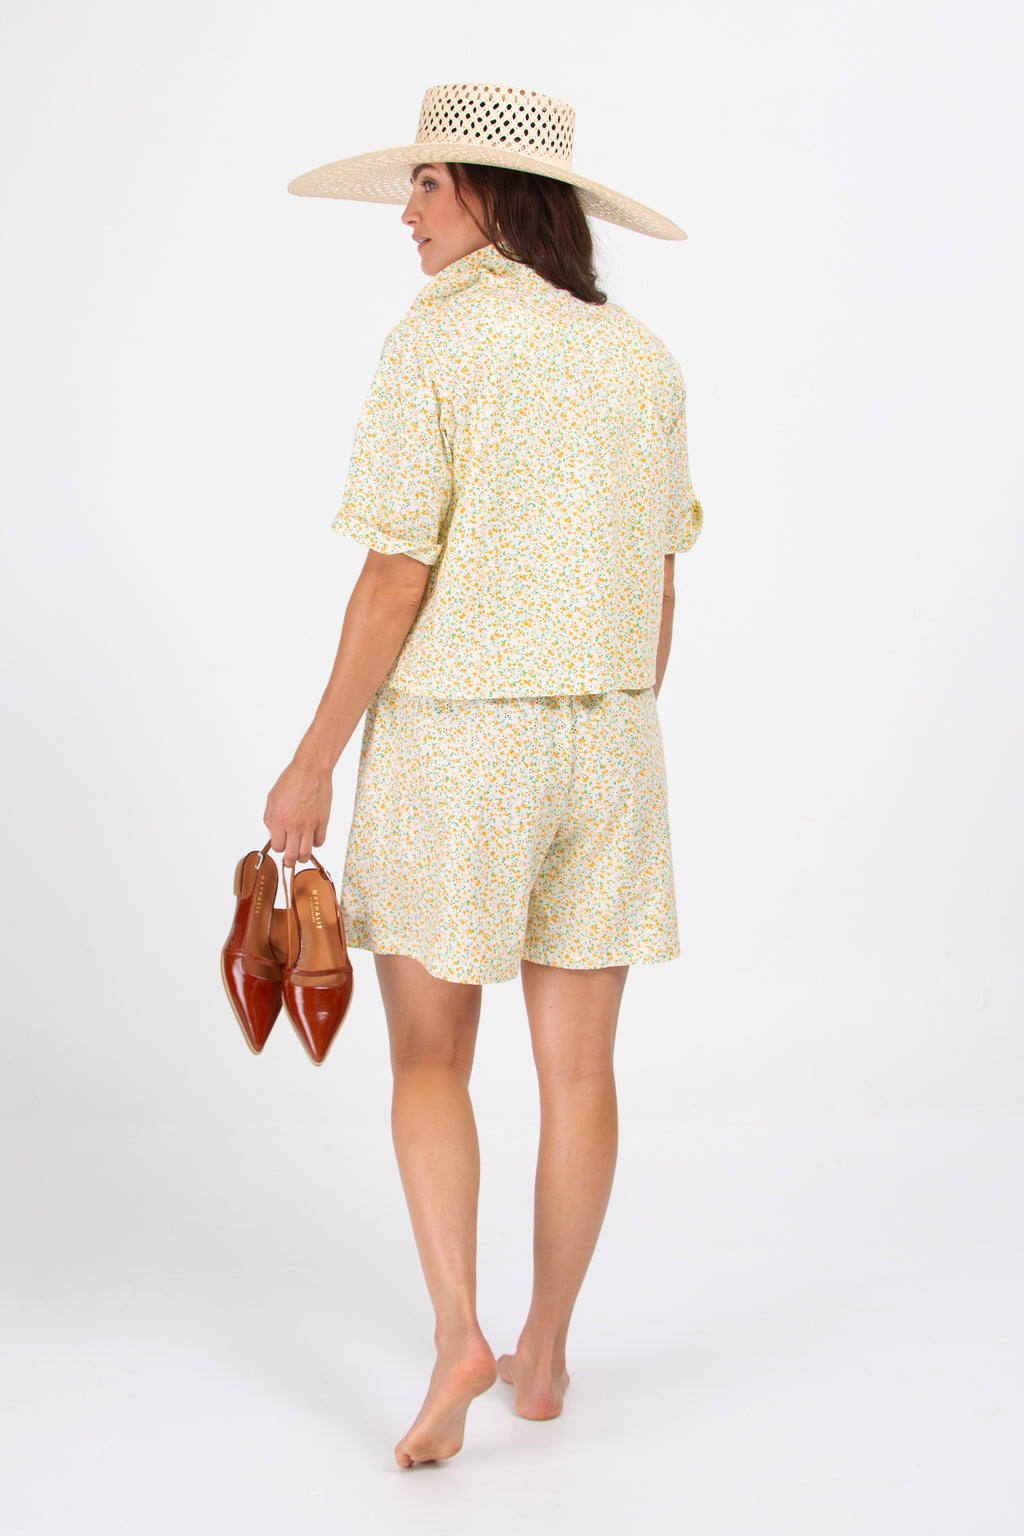 Diede shorts in tiny yellow flowers